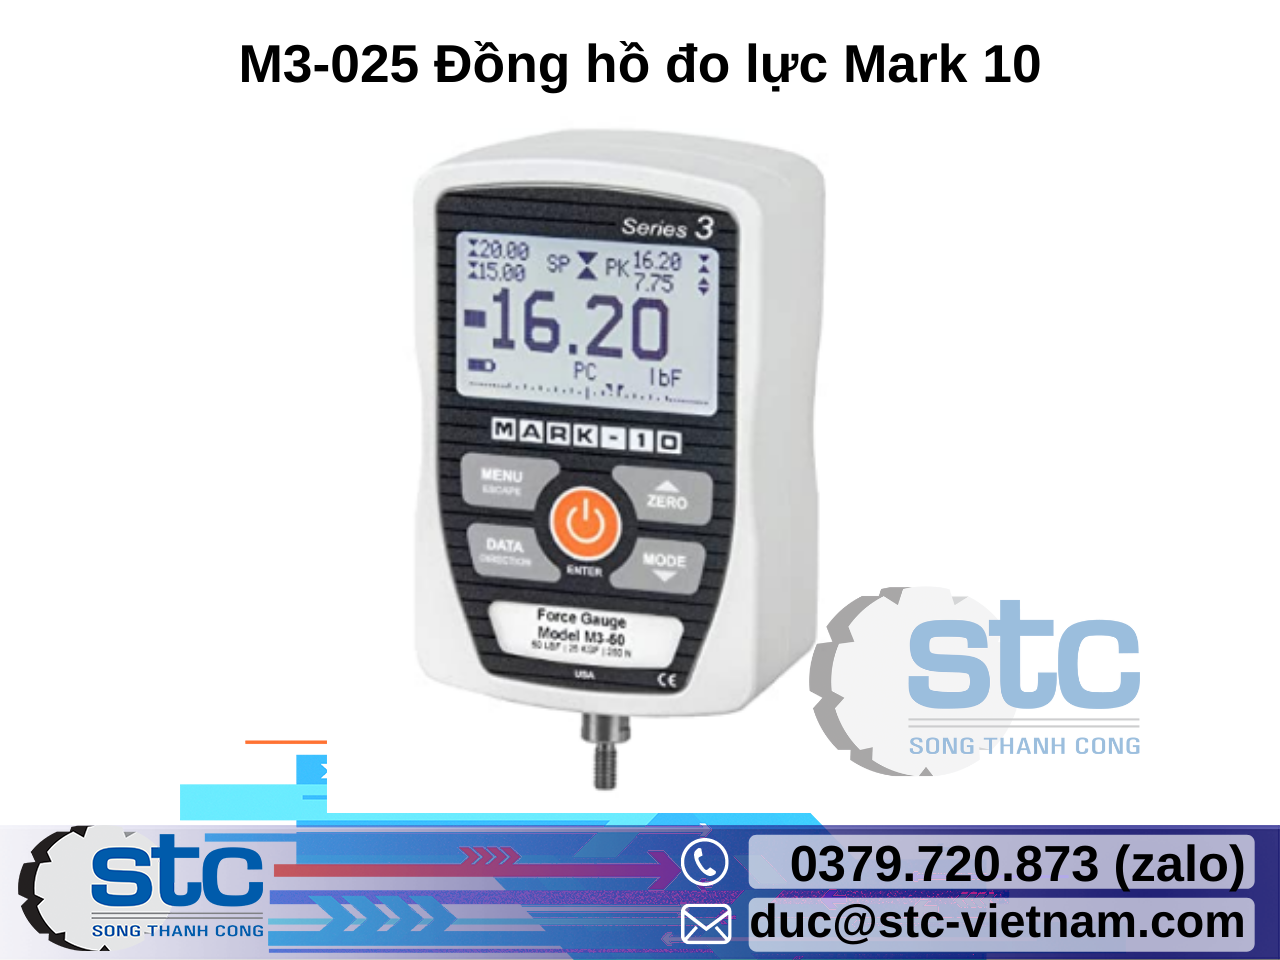 m3-025-dong-ho-do-luc-mark-10.png